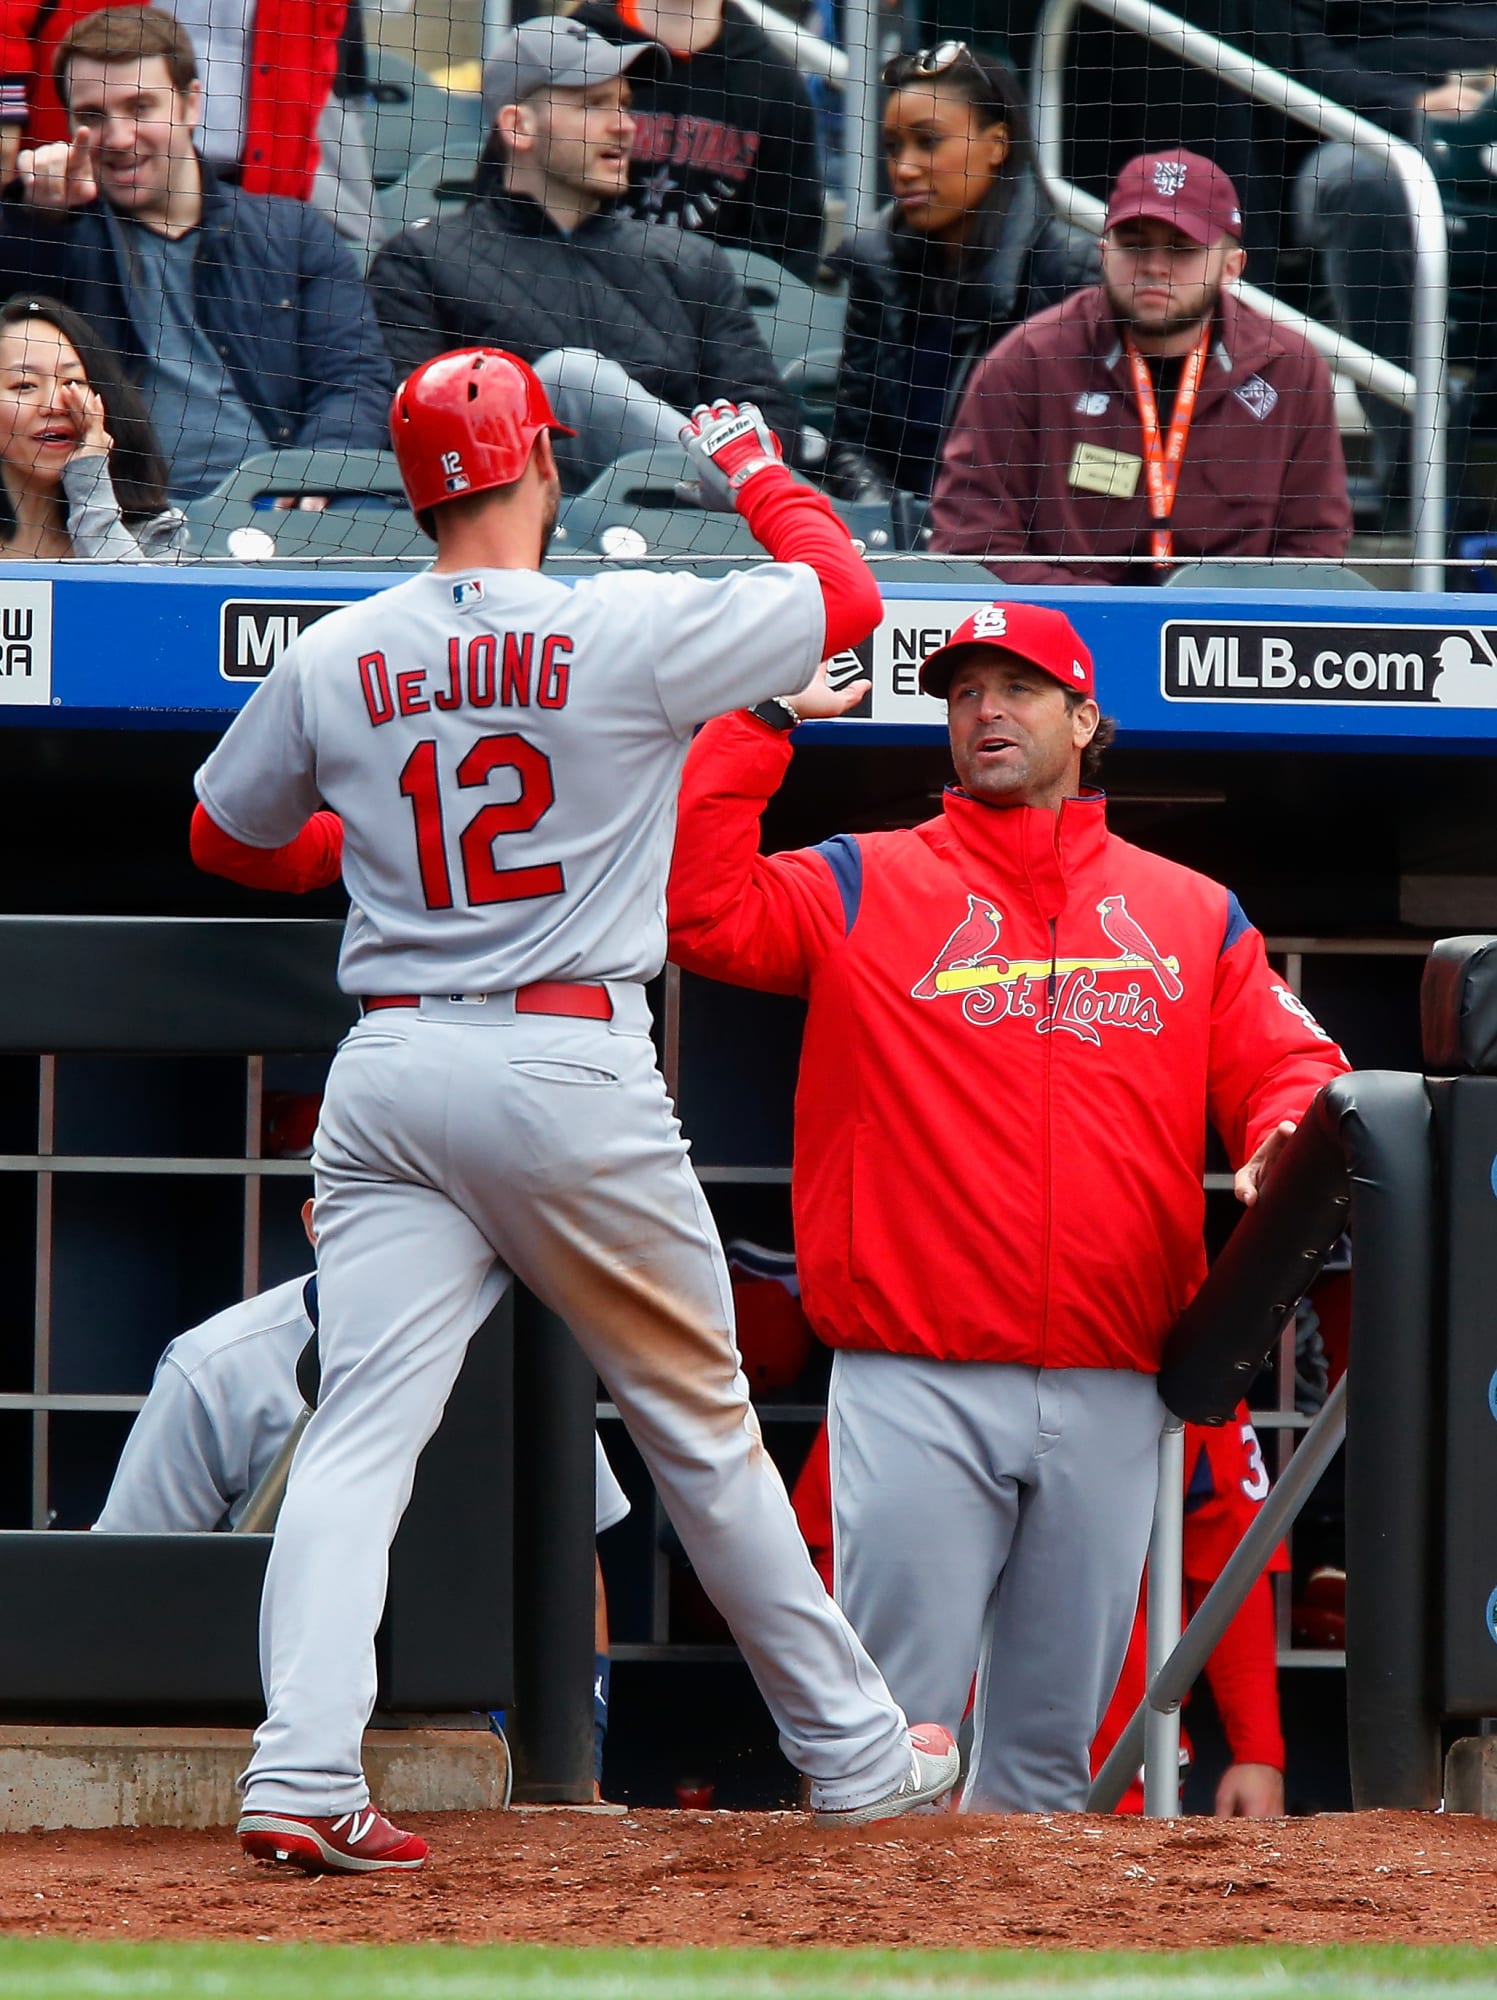 St. Louis Cardinals: The Birds get their first win of the season